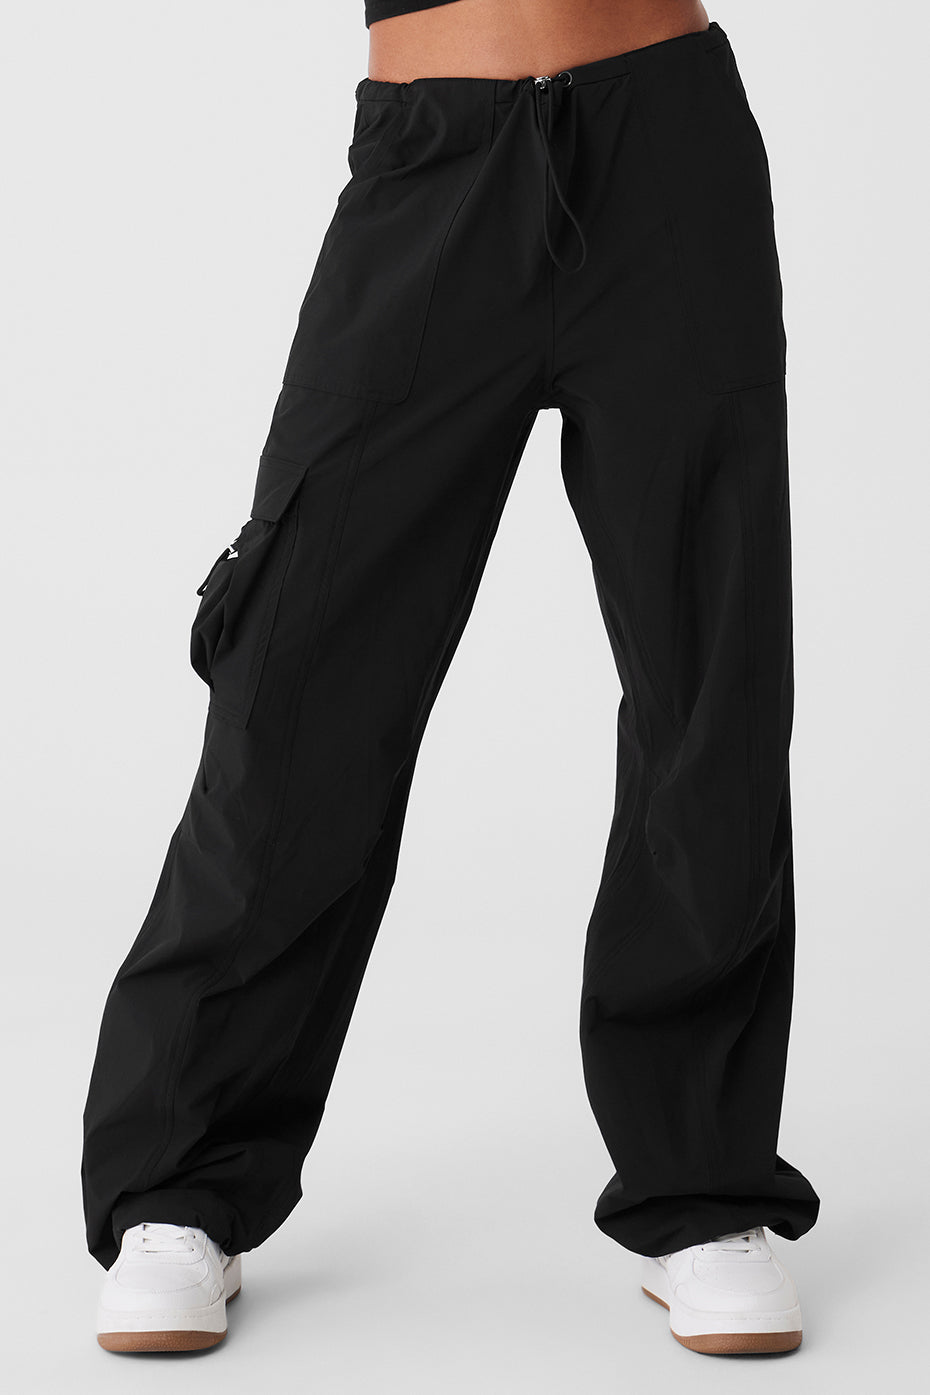 a new day Spandex Cargo Pants for Women